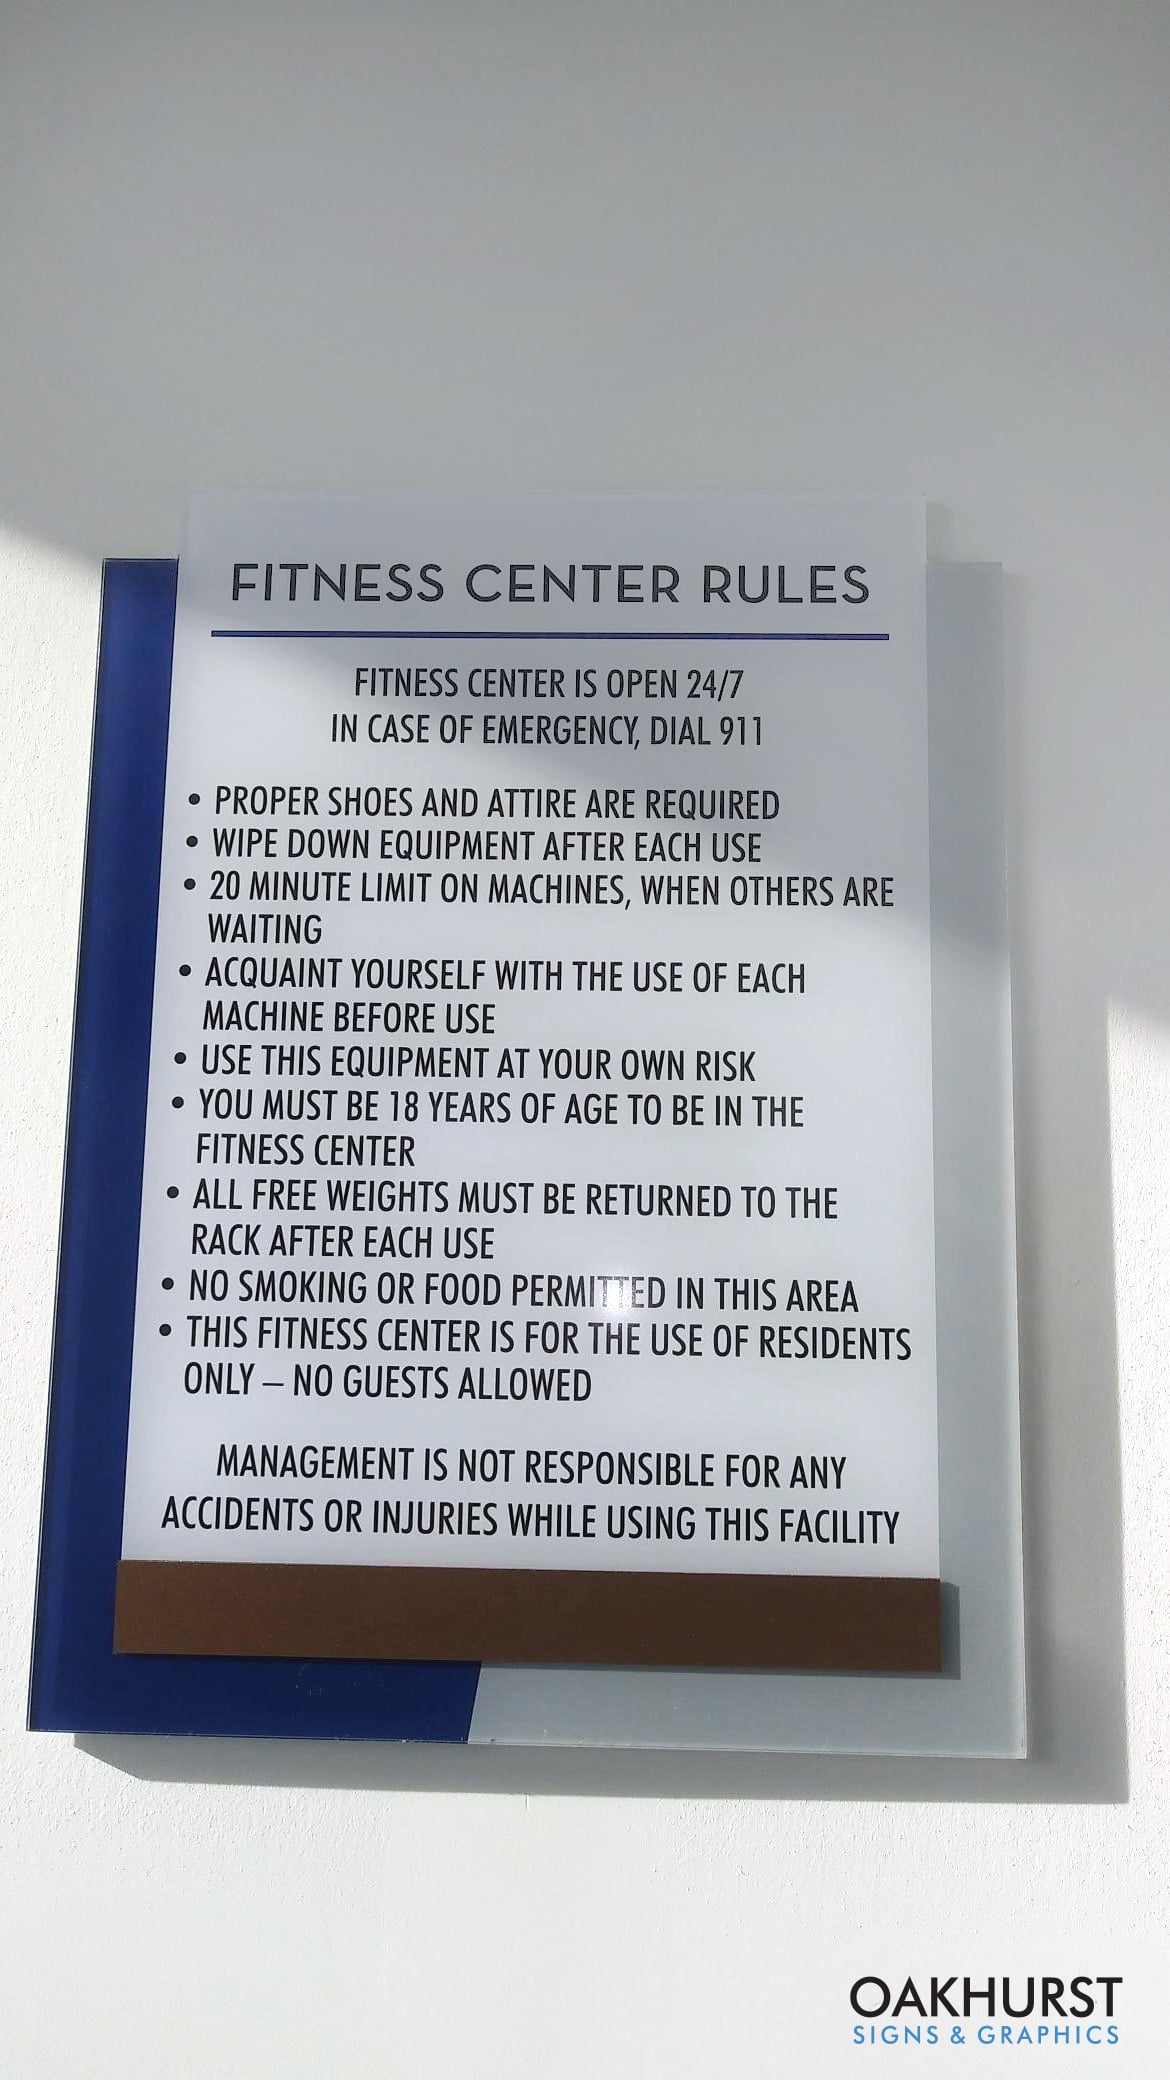 Informational wall sign for Fitness Center Rules matching Princeton Park branding